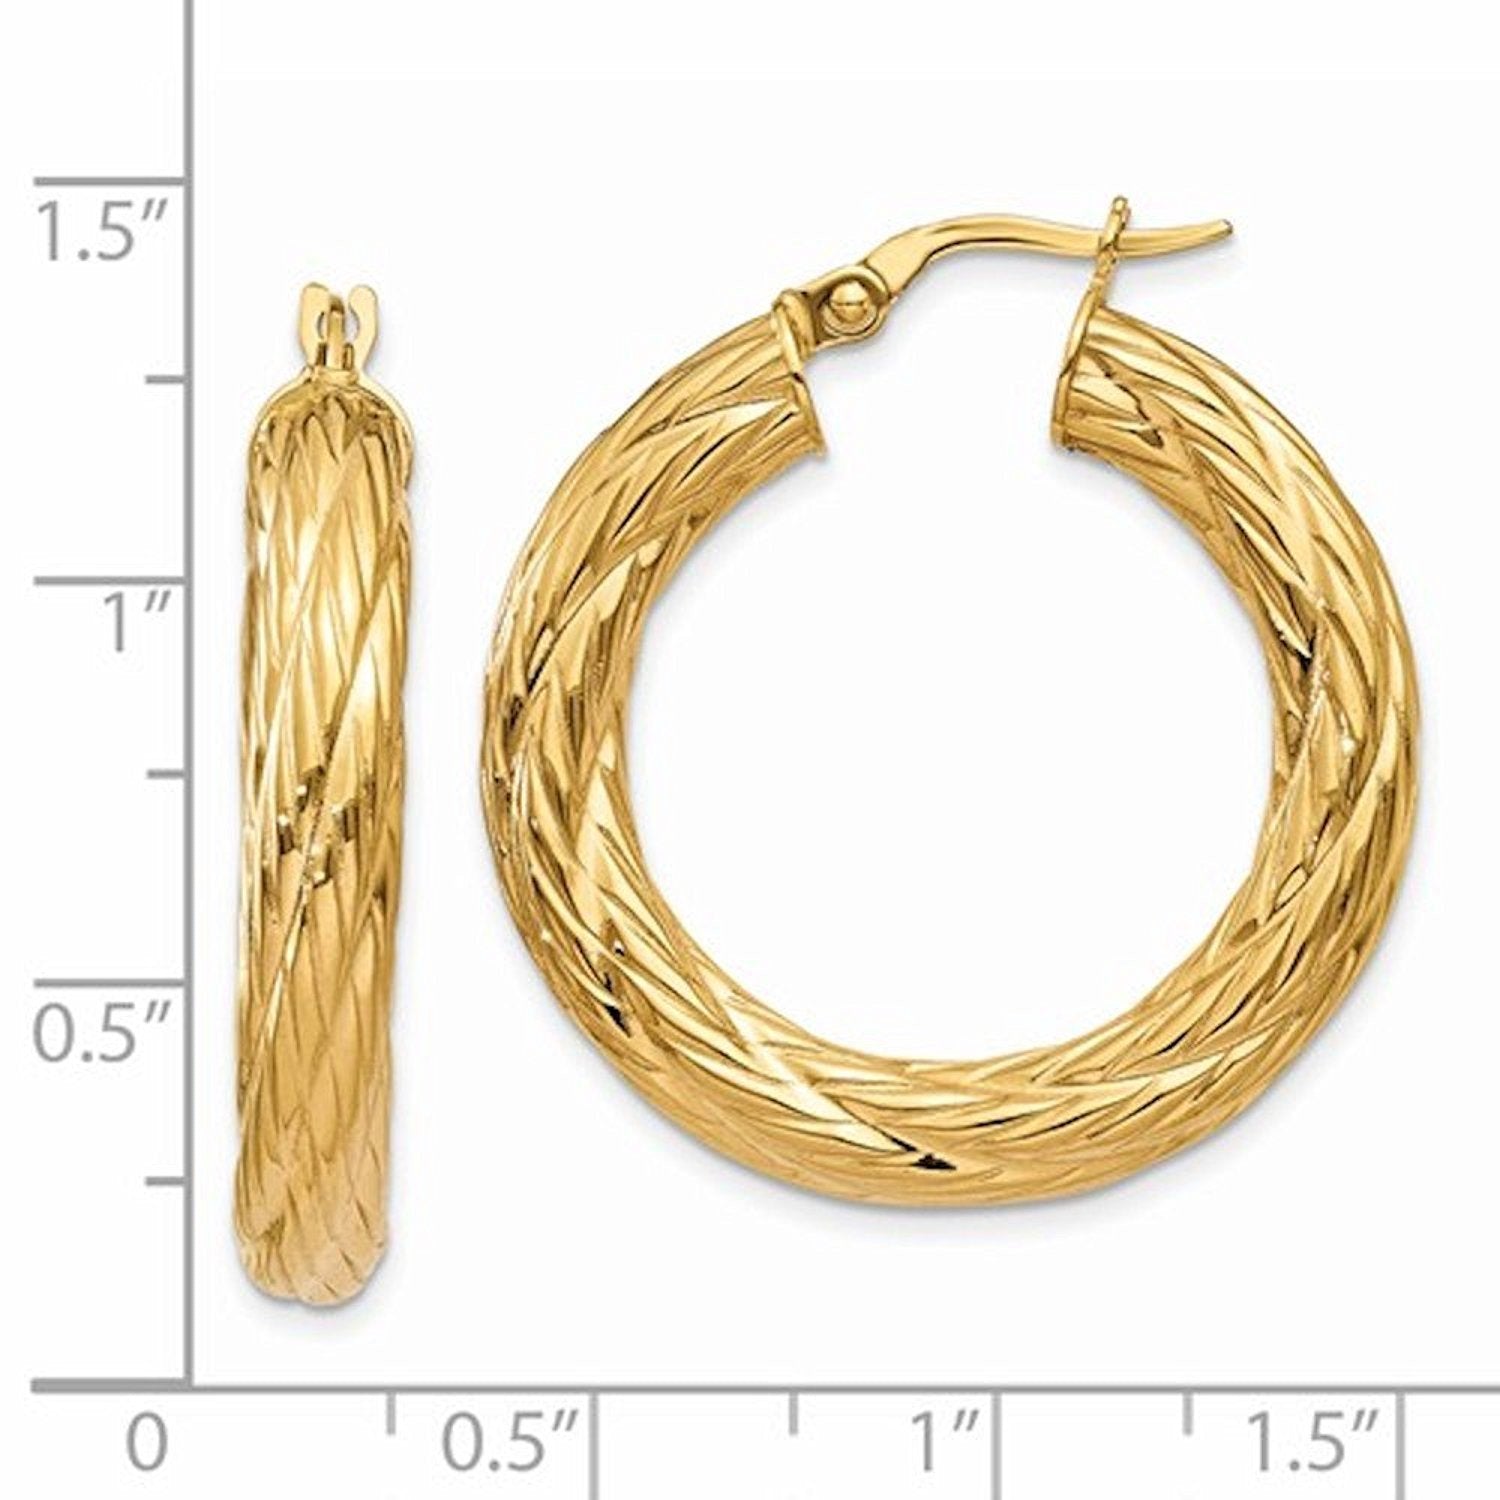 14K Yellow Gold Textured Round Hoop Earrings 30mm x 4.5mm